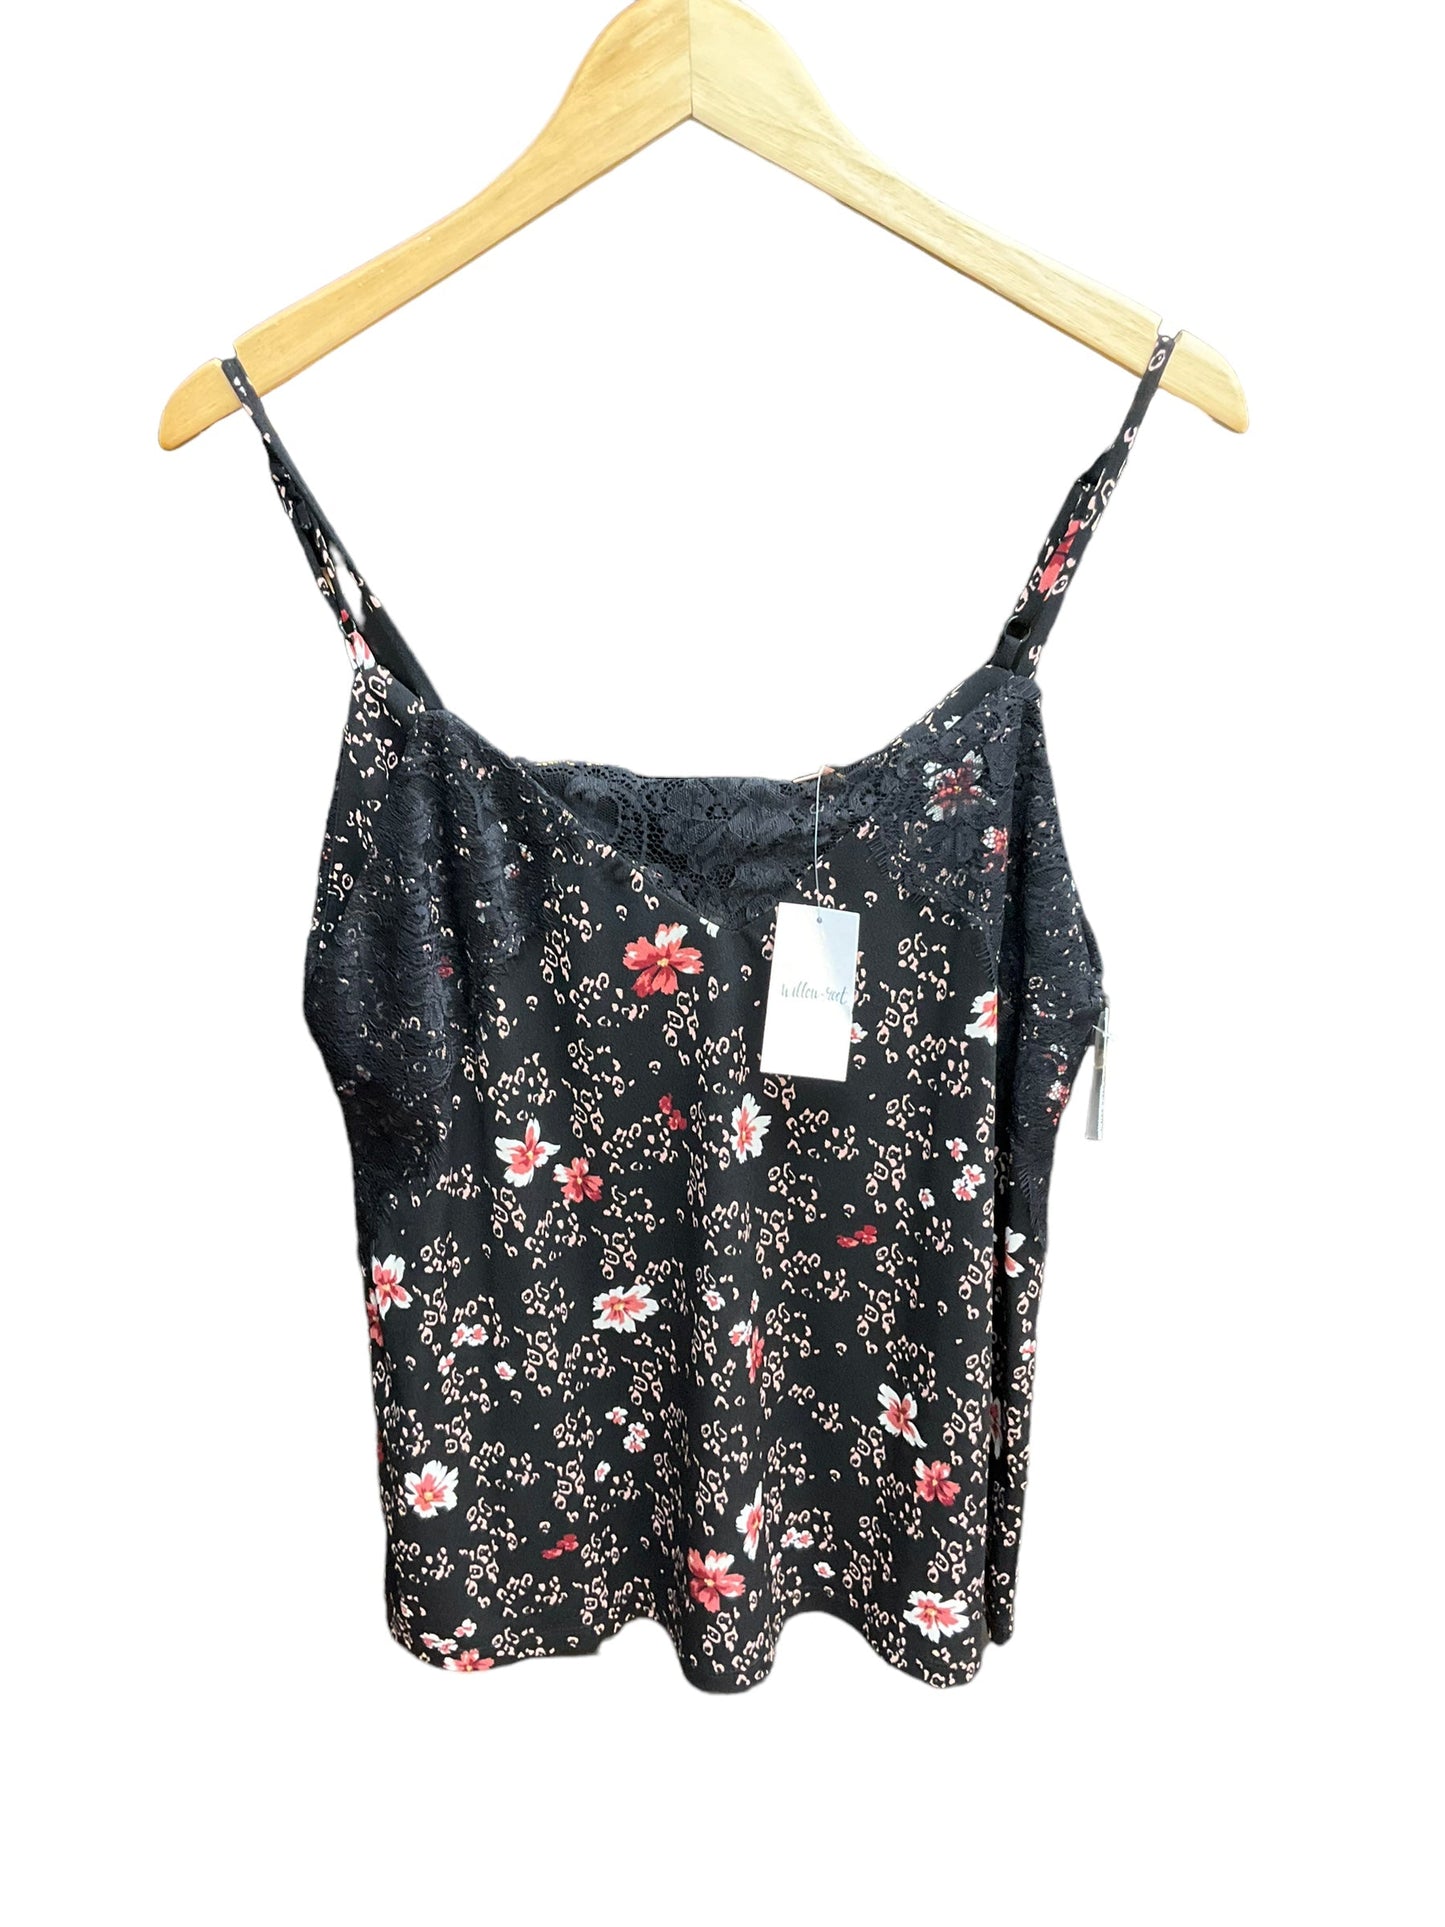 Floral Print Top Sleeveless Clothes Mentor, Size M